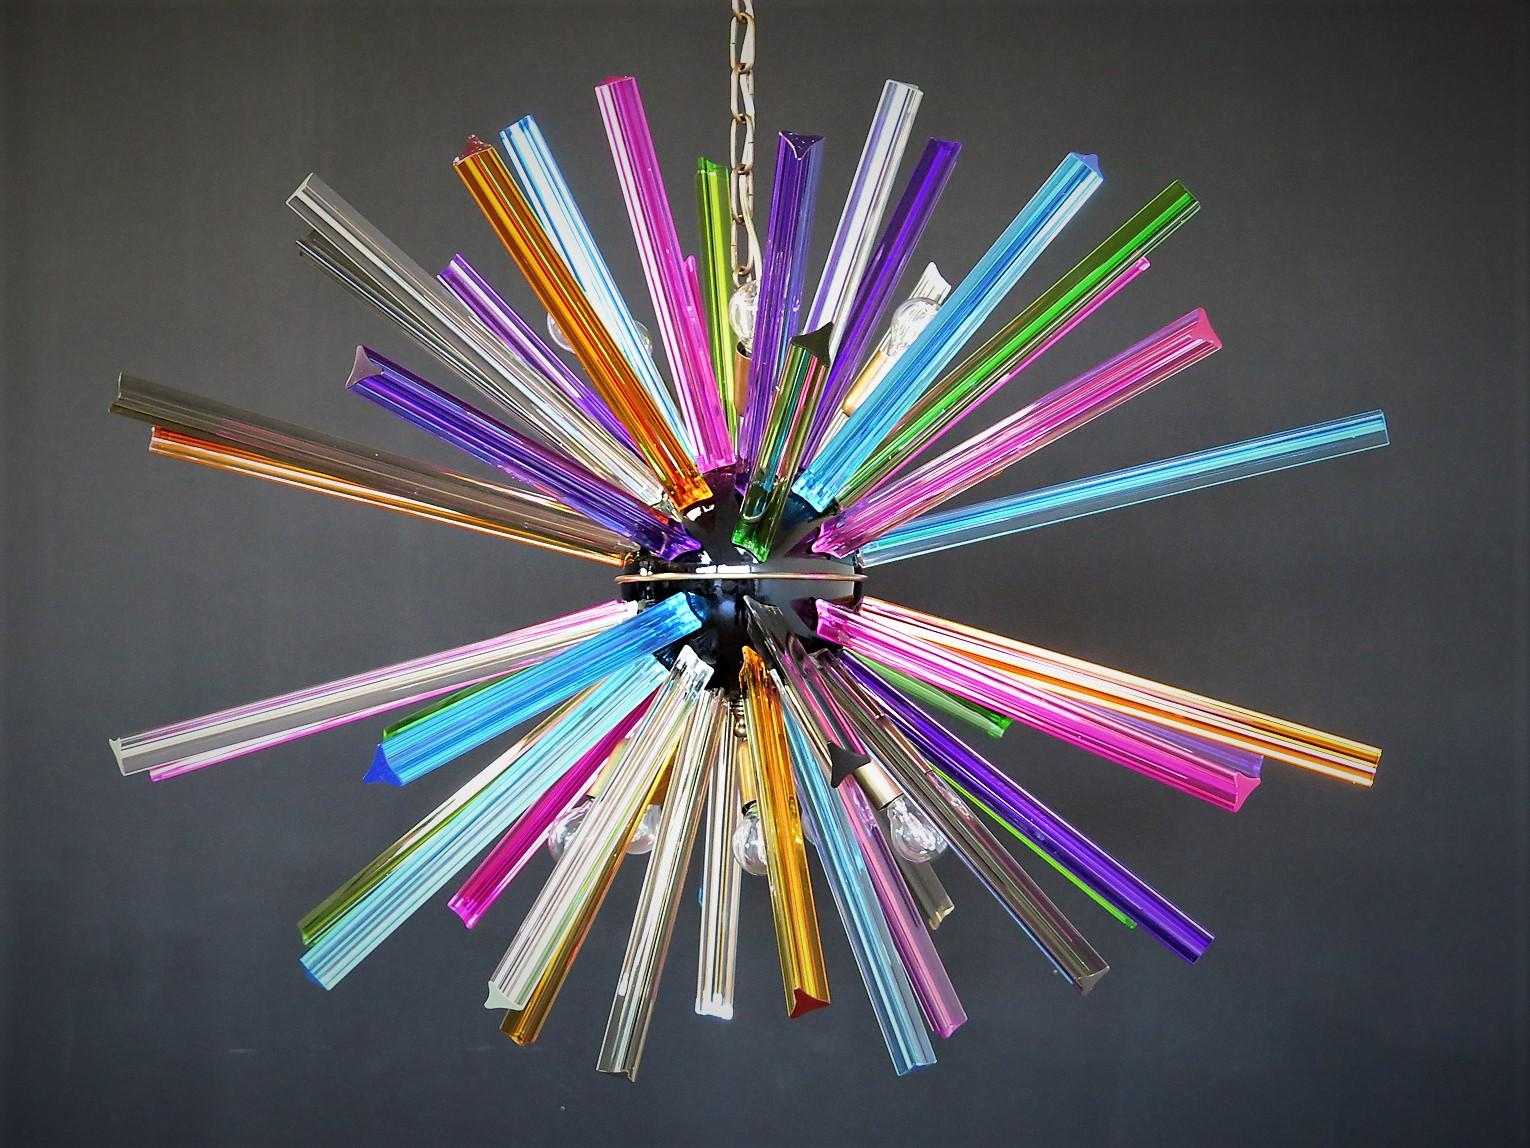 Sputnik chandelier surrounding 50 multicolored crystal glass 'triedri' prisms radiating from a center black metal nucleus. Brass lamp holder.
Period: late 20th century
Dimensions: 51.20 inches (130 cm) height with chain; 27.55 inches (70 cm)